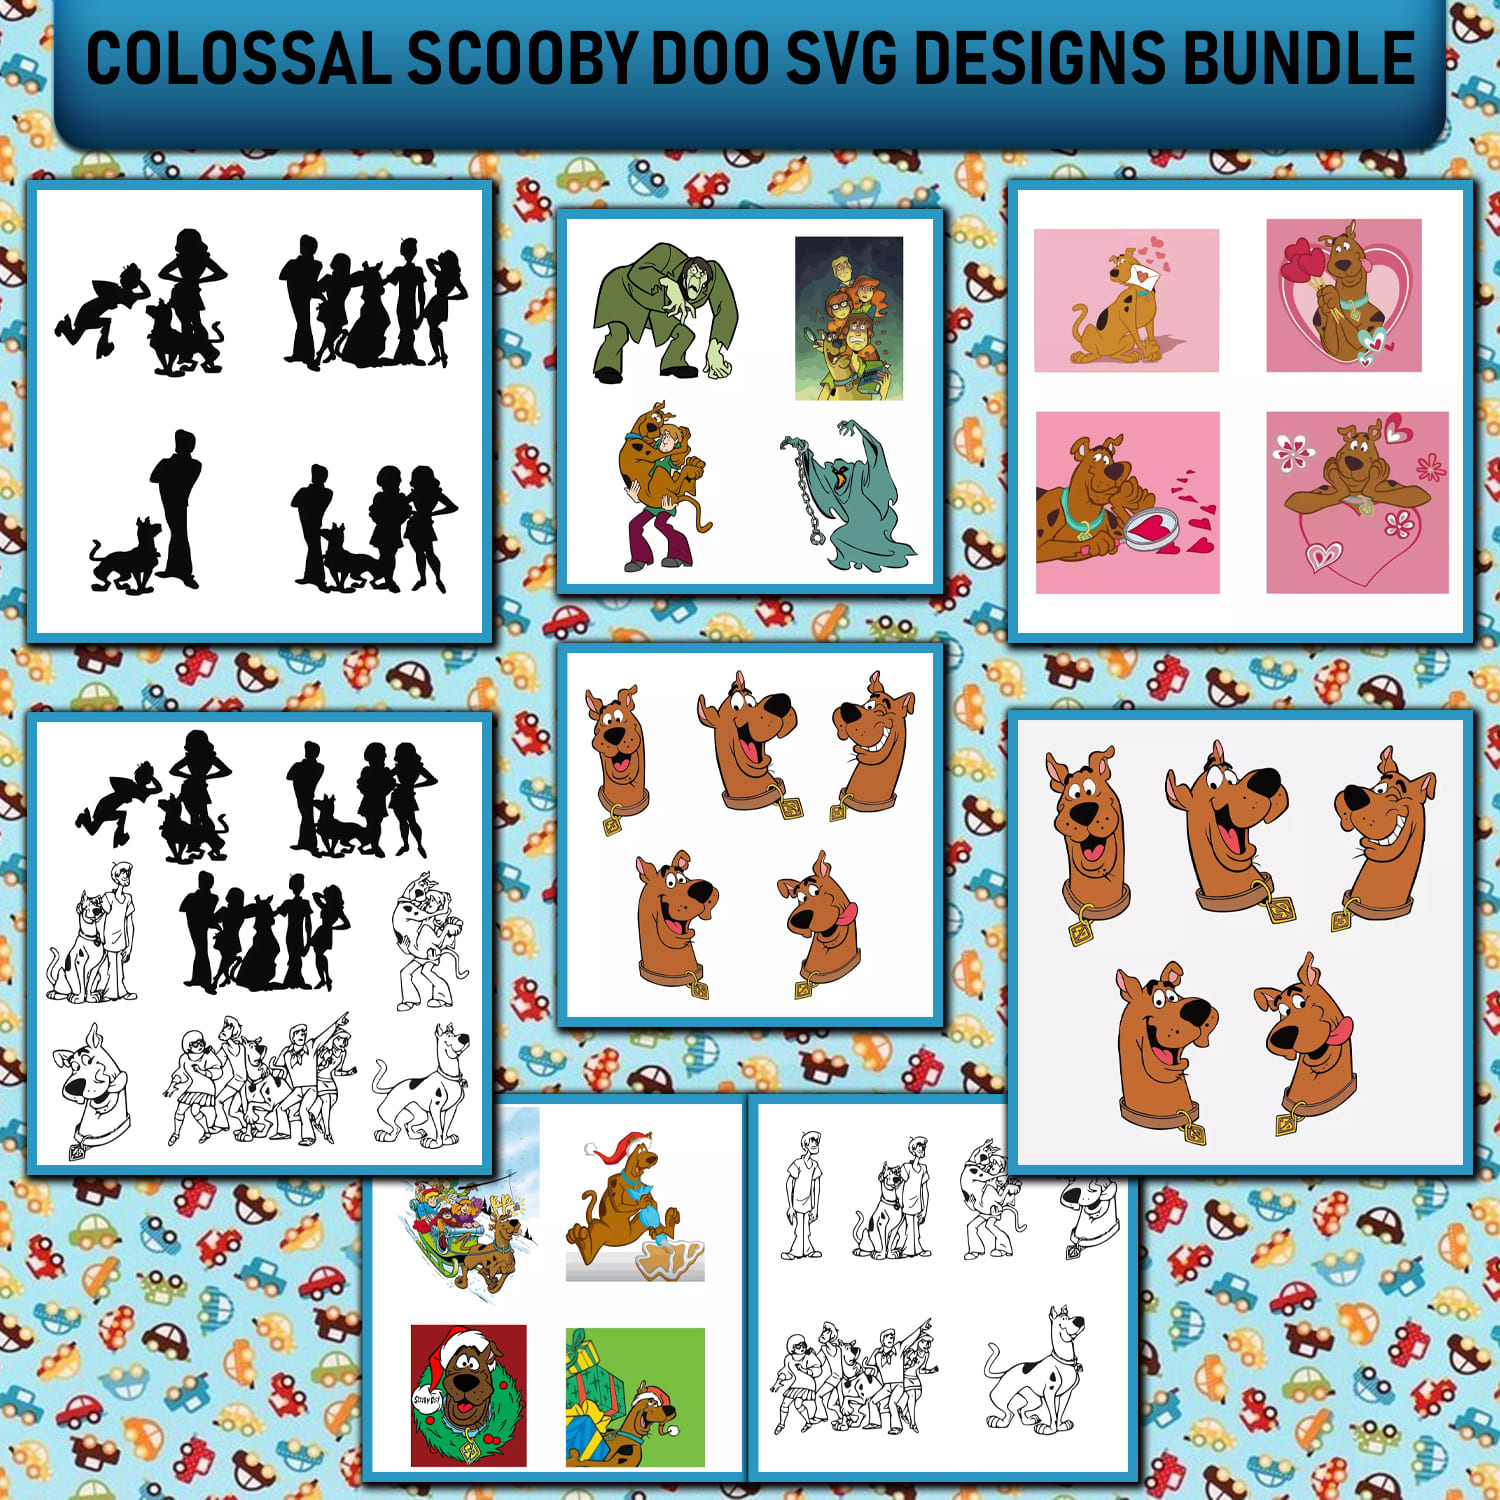 Colossal Scooby Doo SVG Designs Bundle cover.